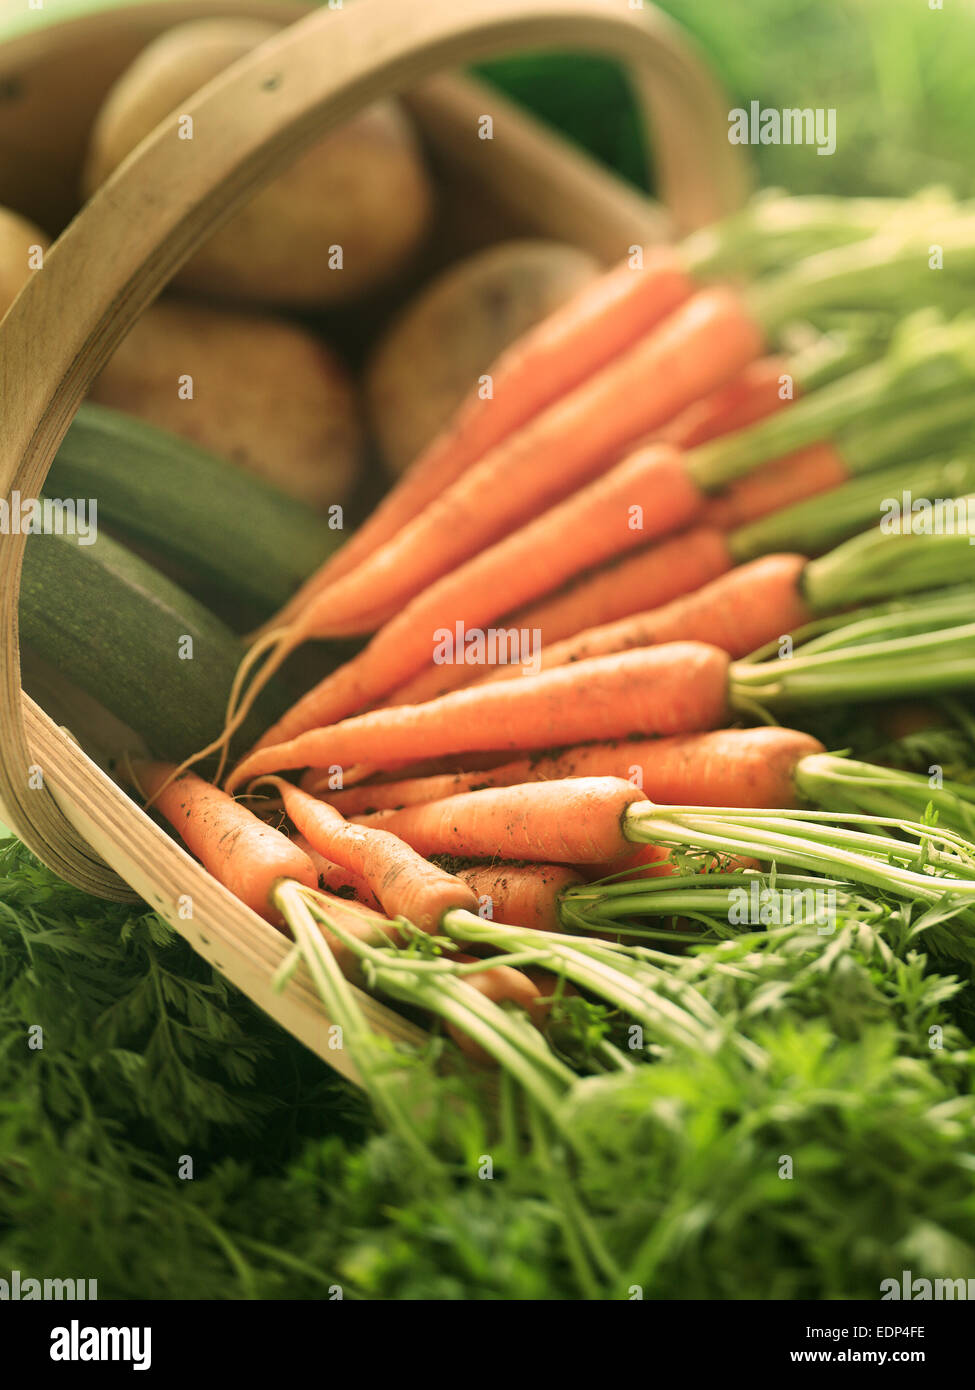 A shallow depth of field shot of freshly dug vegetables - carrots, potatoes and courgettes Stock Photo